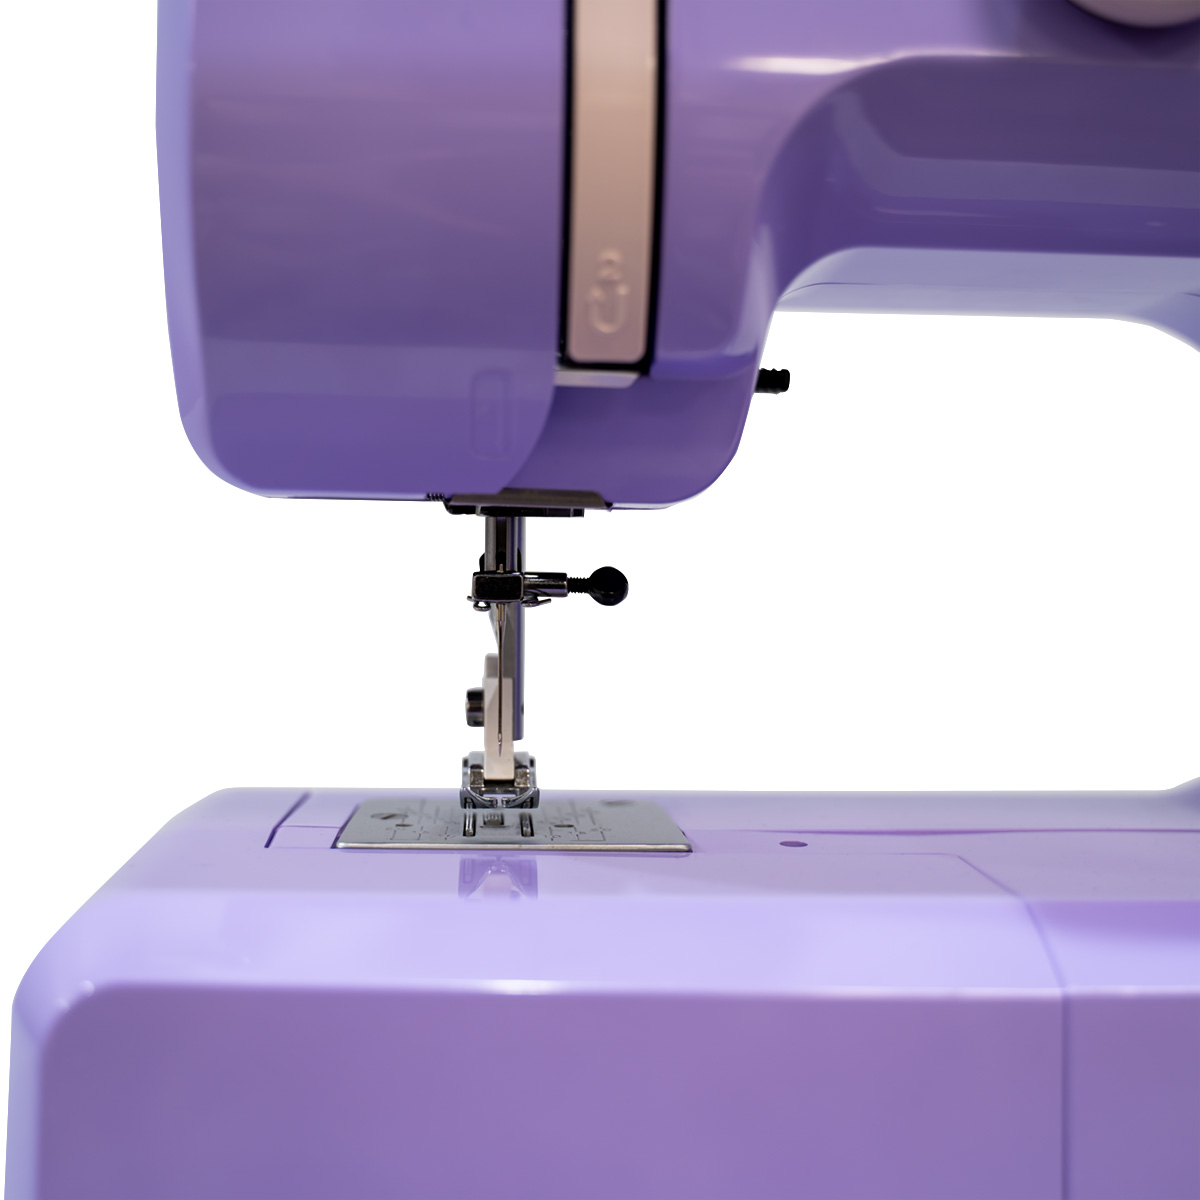 Life in Lilac, UK Lifestyle Blog, Review: Singer Simple Sewing Machine